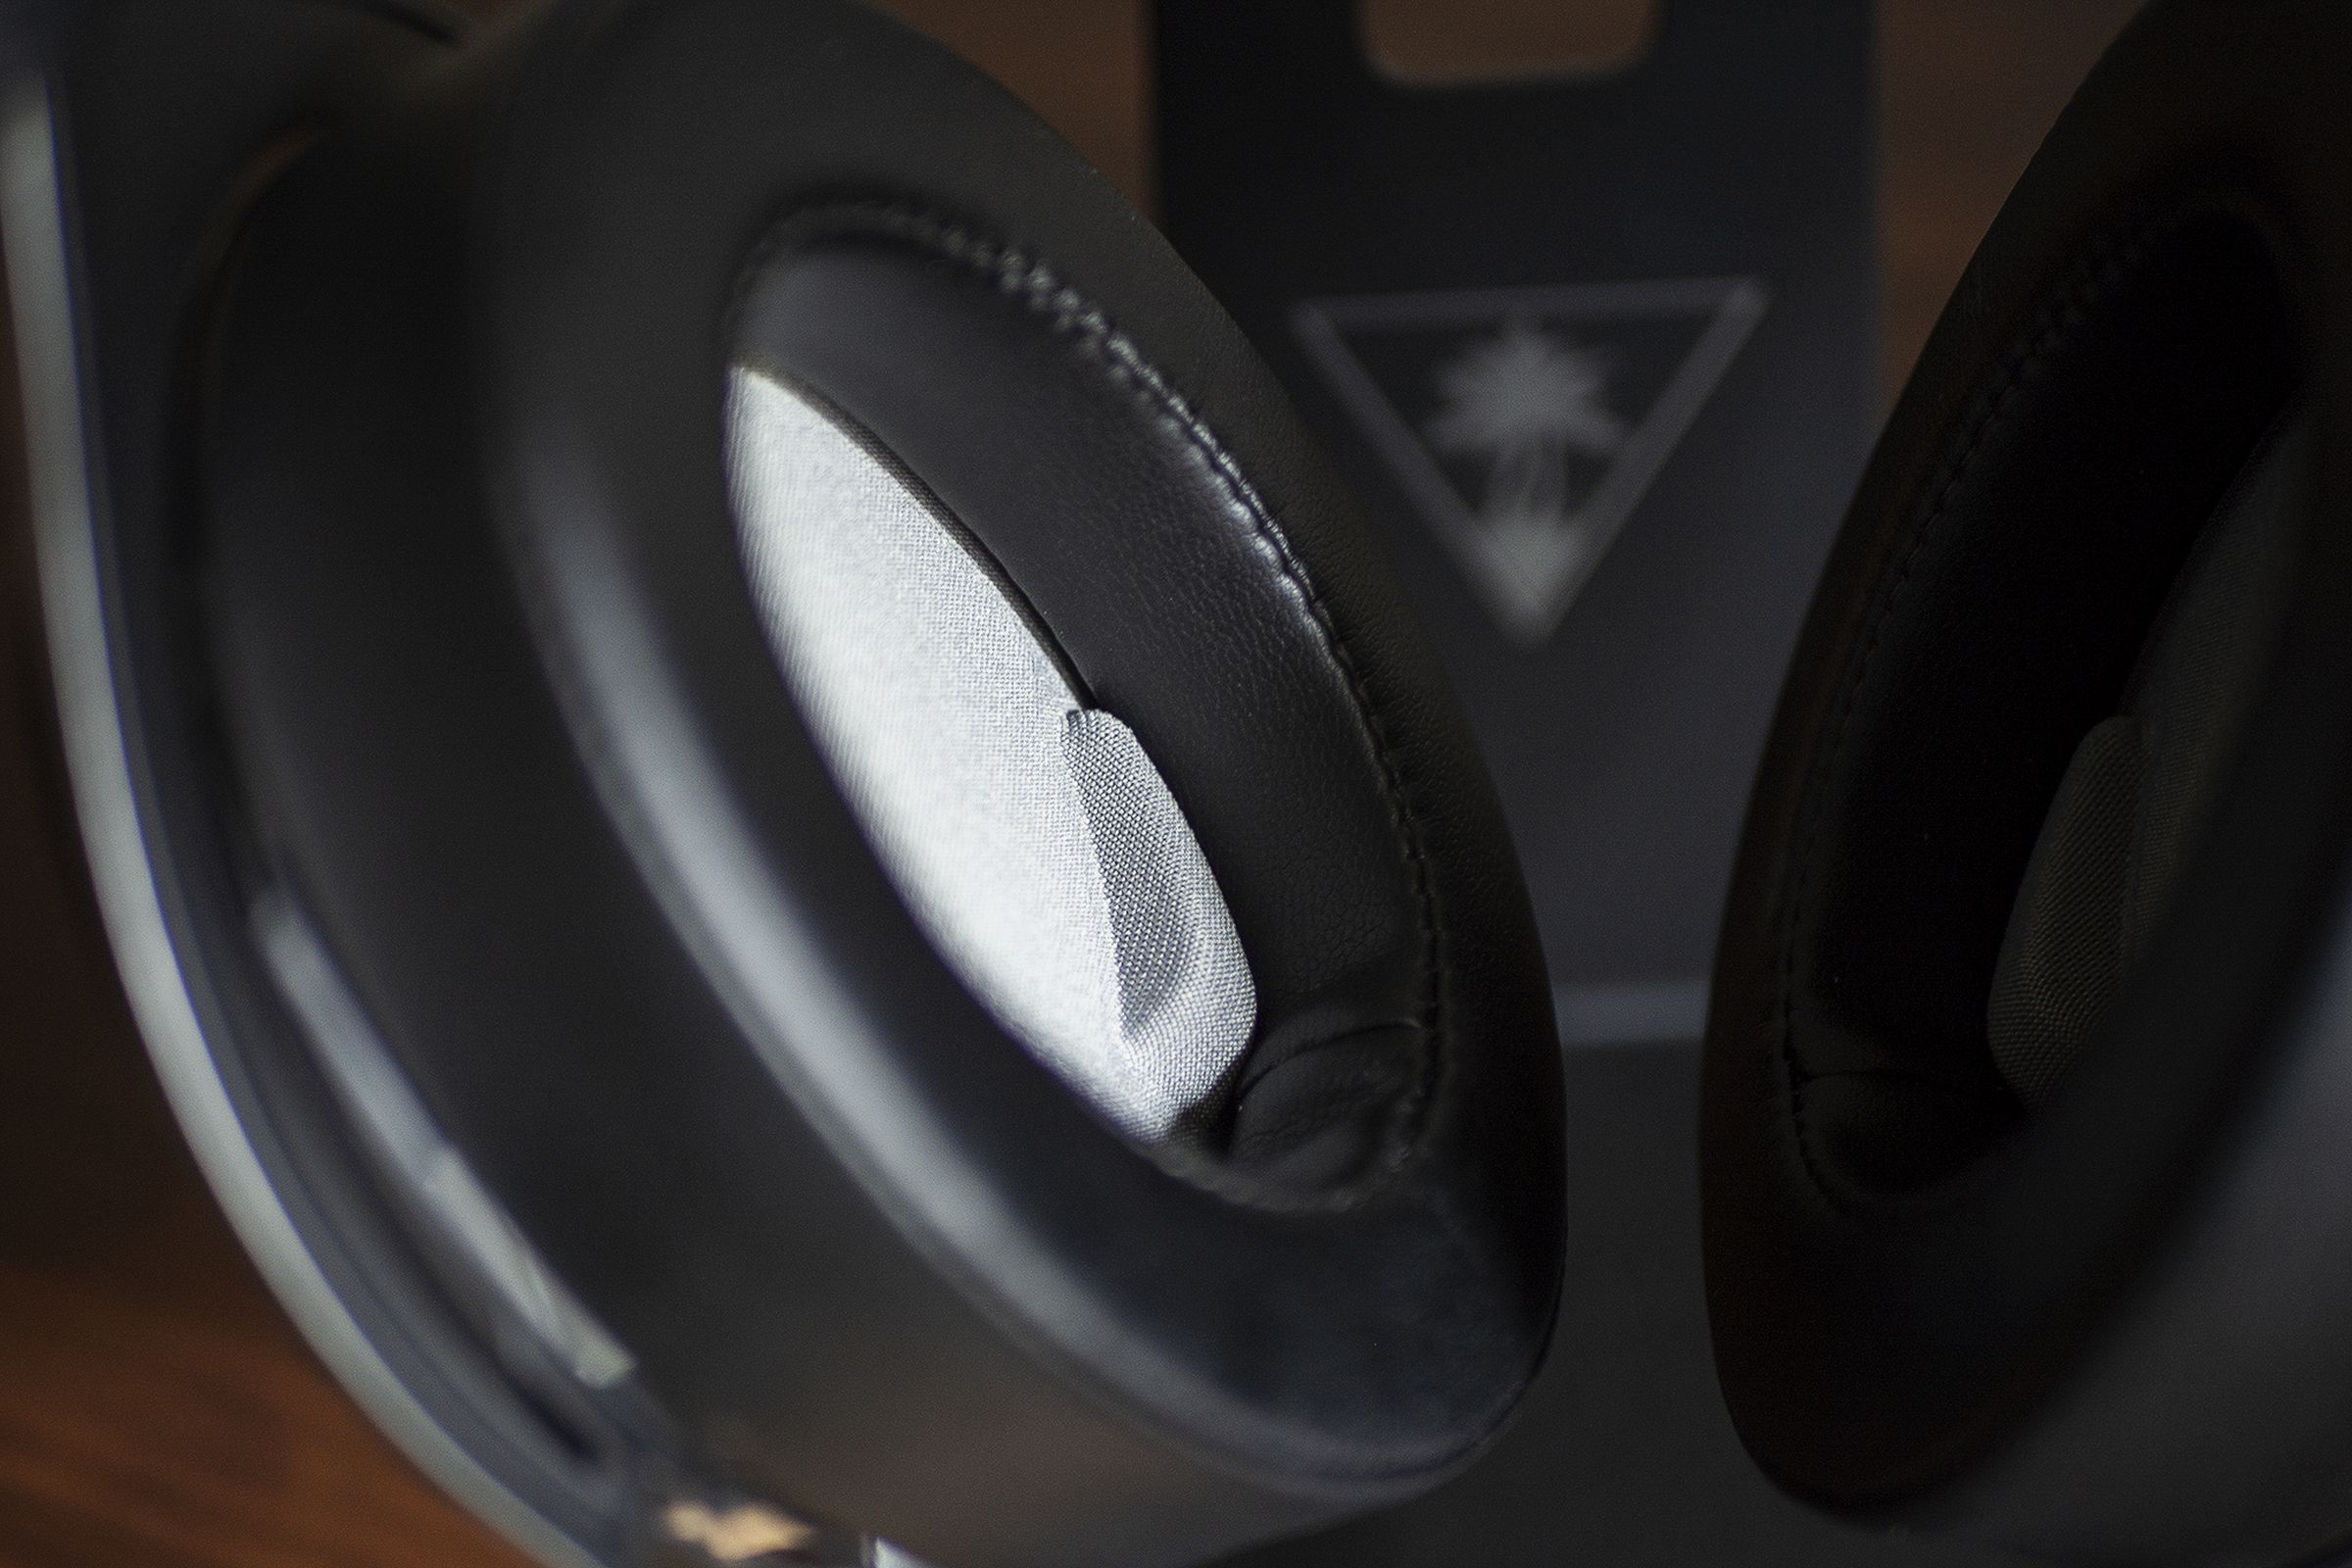 An inside view of the plush ear cups.